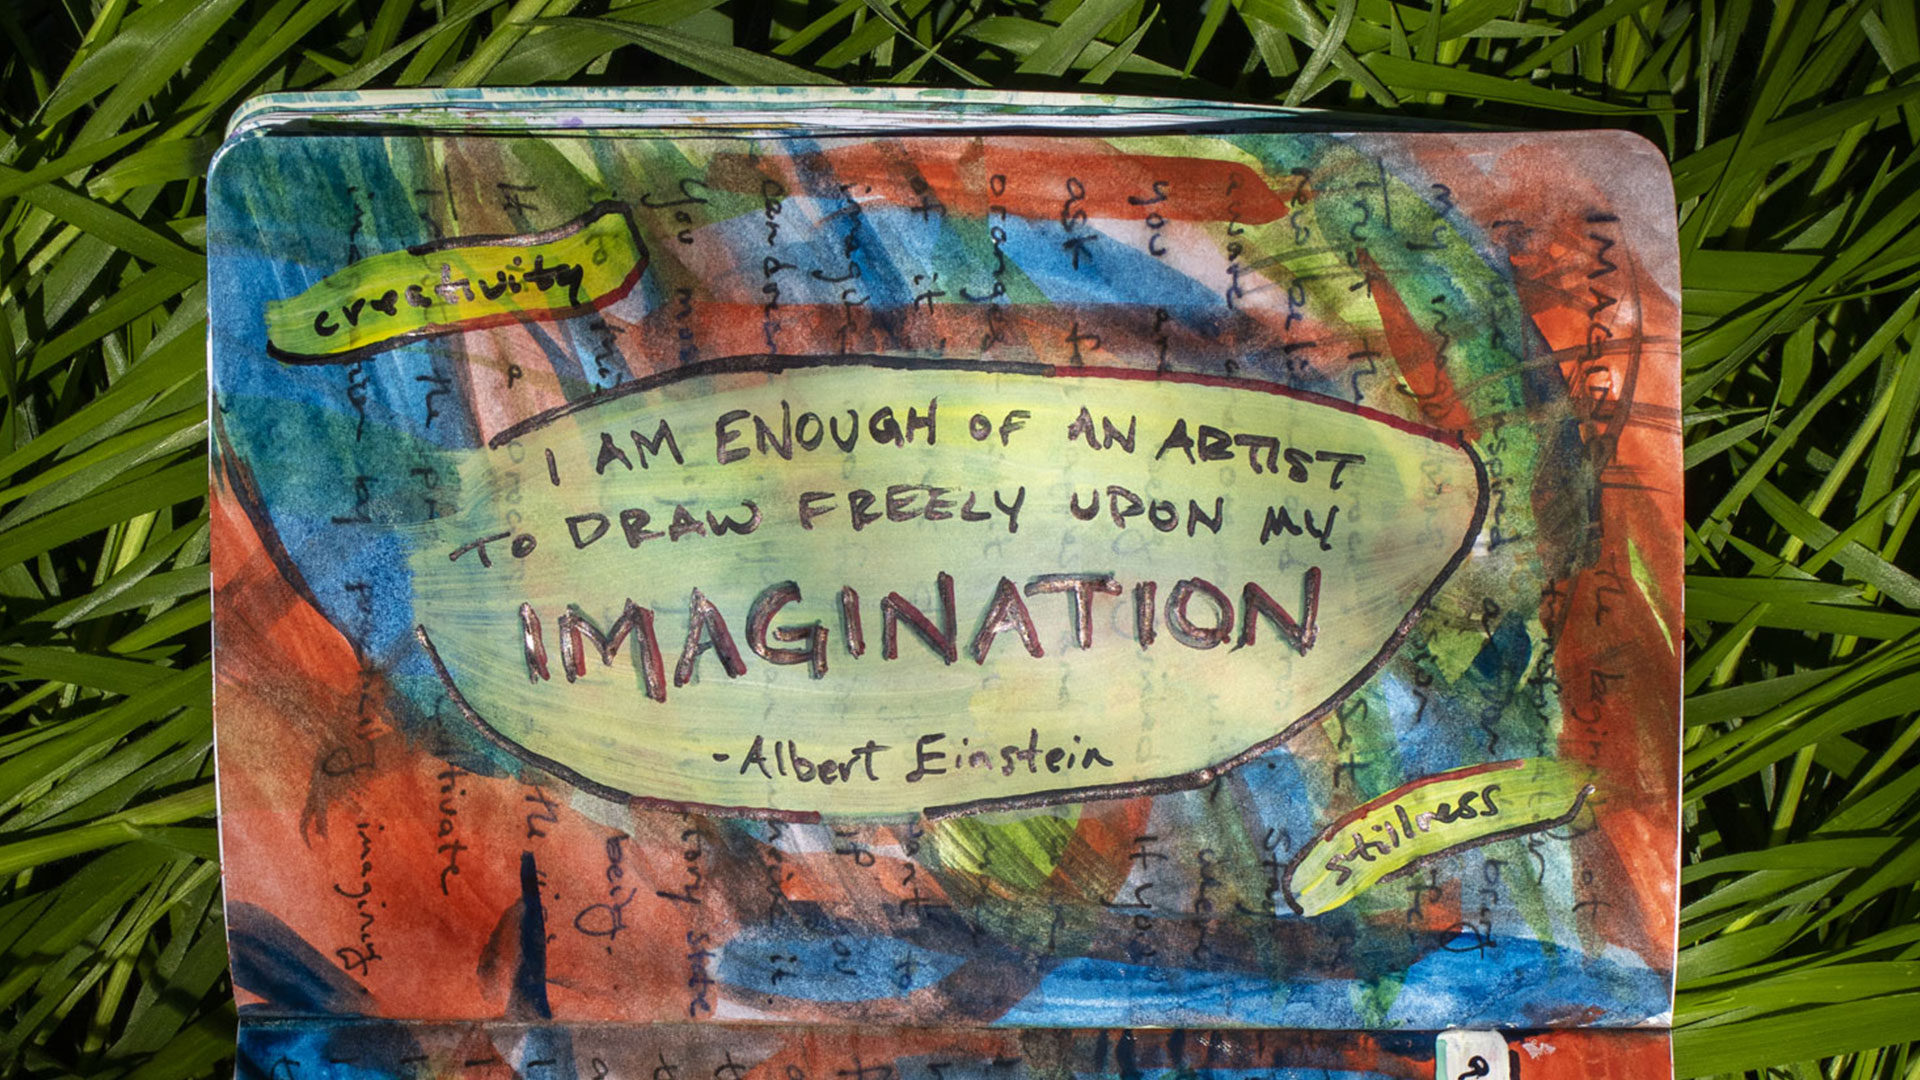 Elevating Consciouness by Merging Imagination with Creativity Through Inspired Action